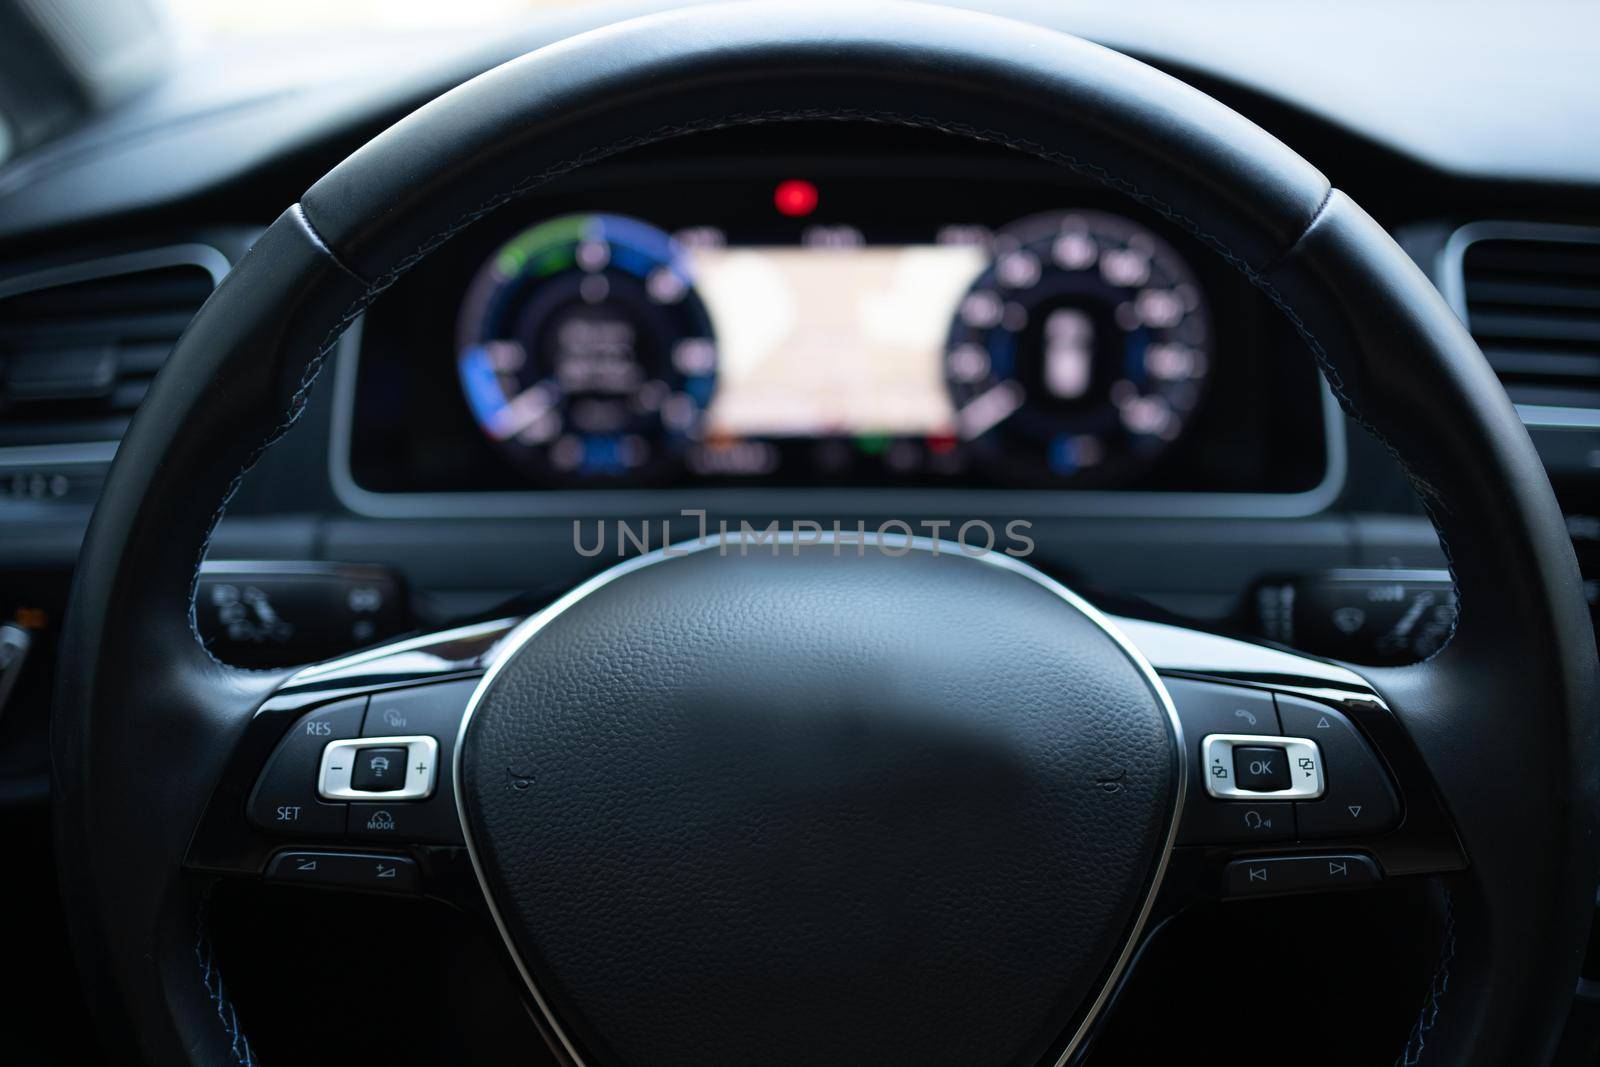 Close up of steering wheel of a new electric vehicle, interior cockpit, electric buttons, digital speedometer. Electric car control devices. Cruise control buttons, speed limitation, car's signal by uflypro